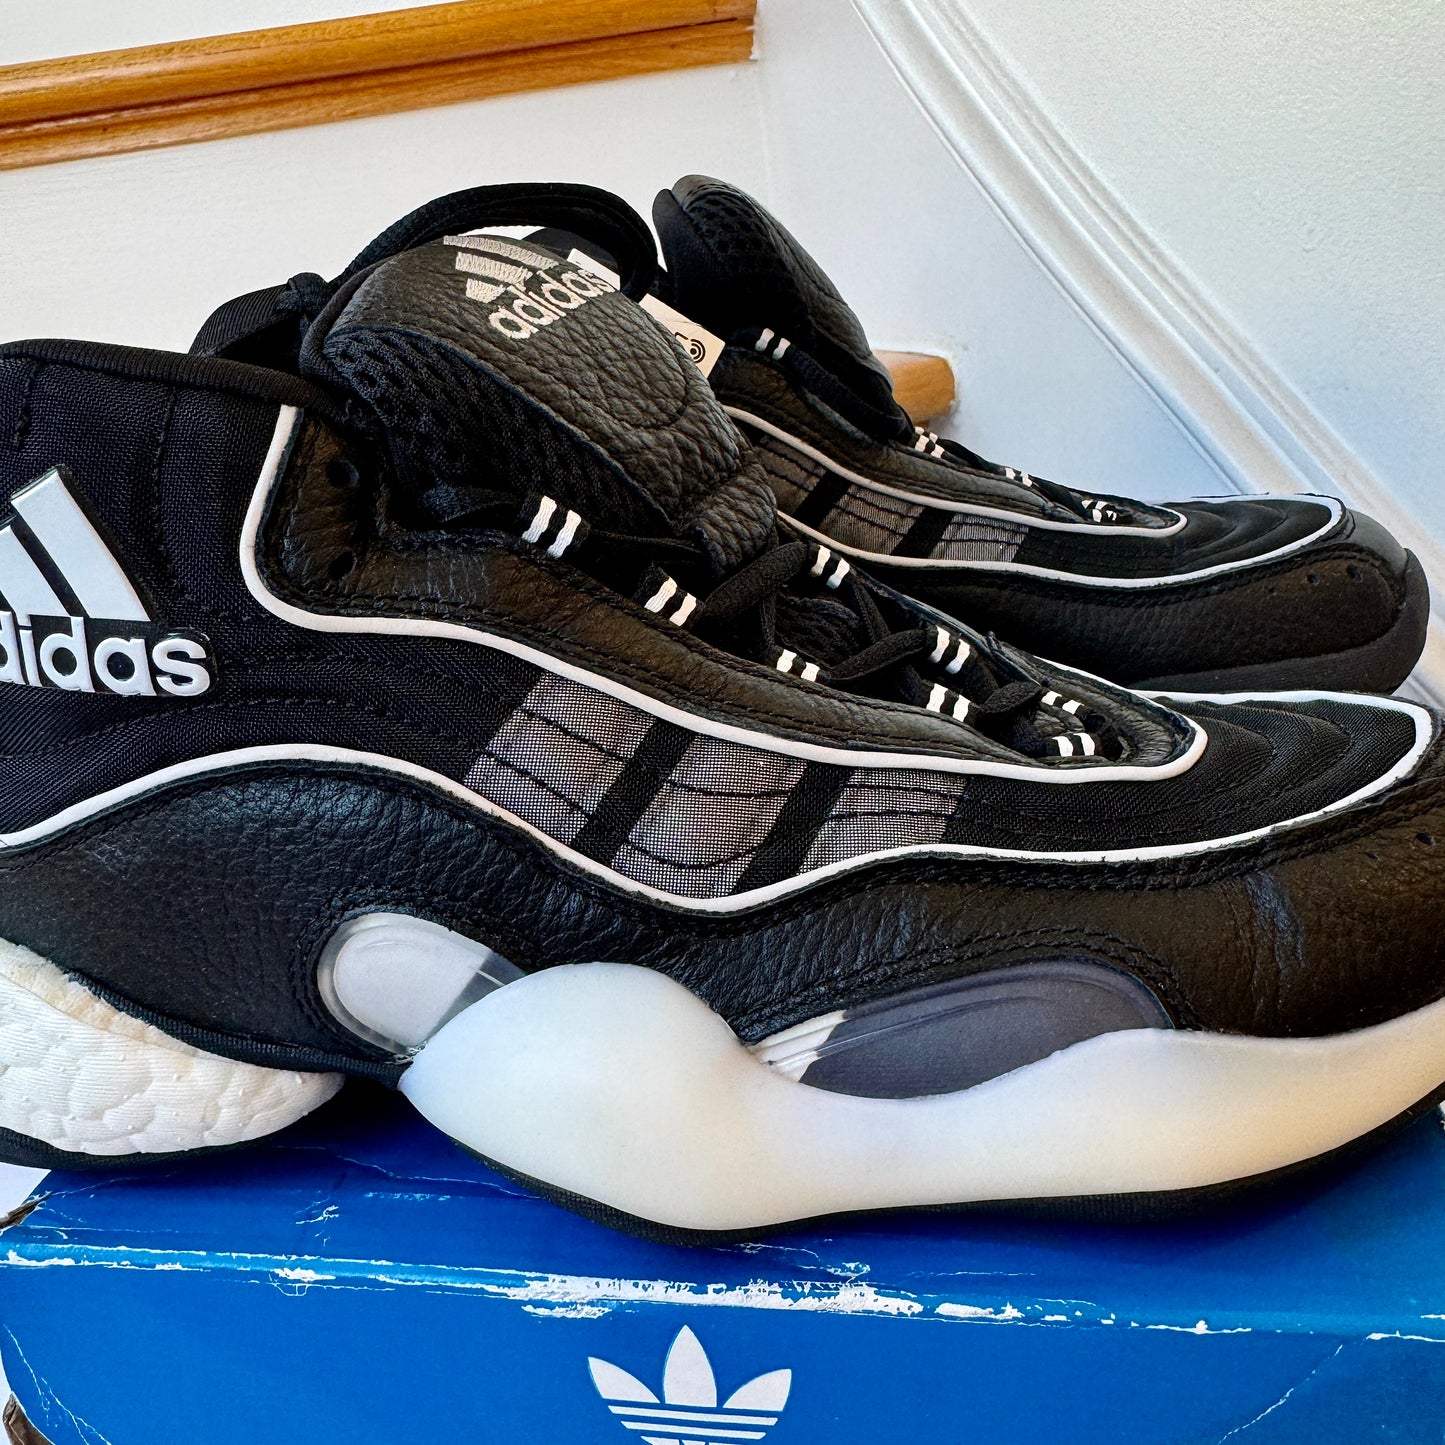 Adidas Never Made 98 X Crazy BYW in black / white sneakers